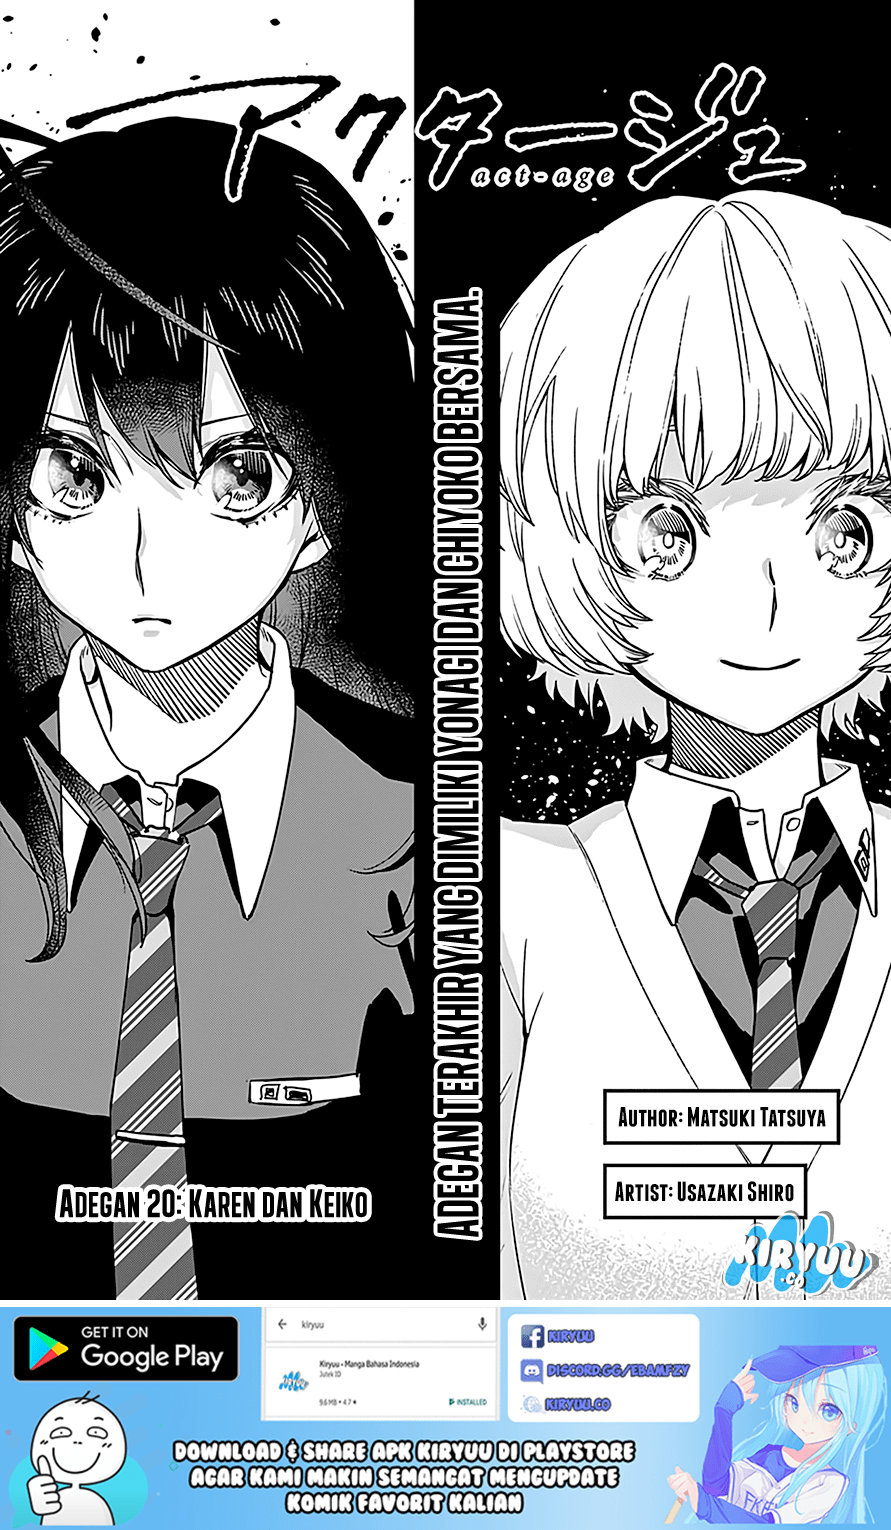 ACT-AGE Chapter 20